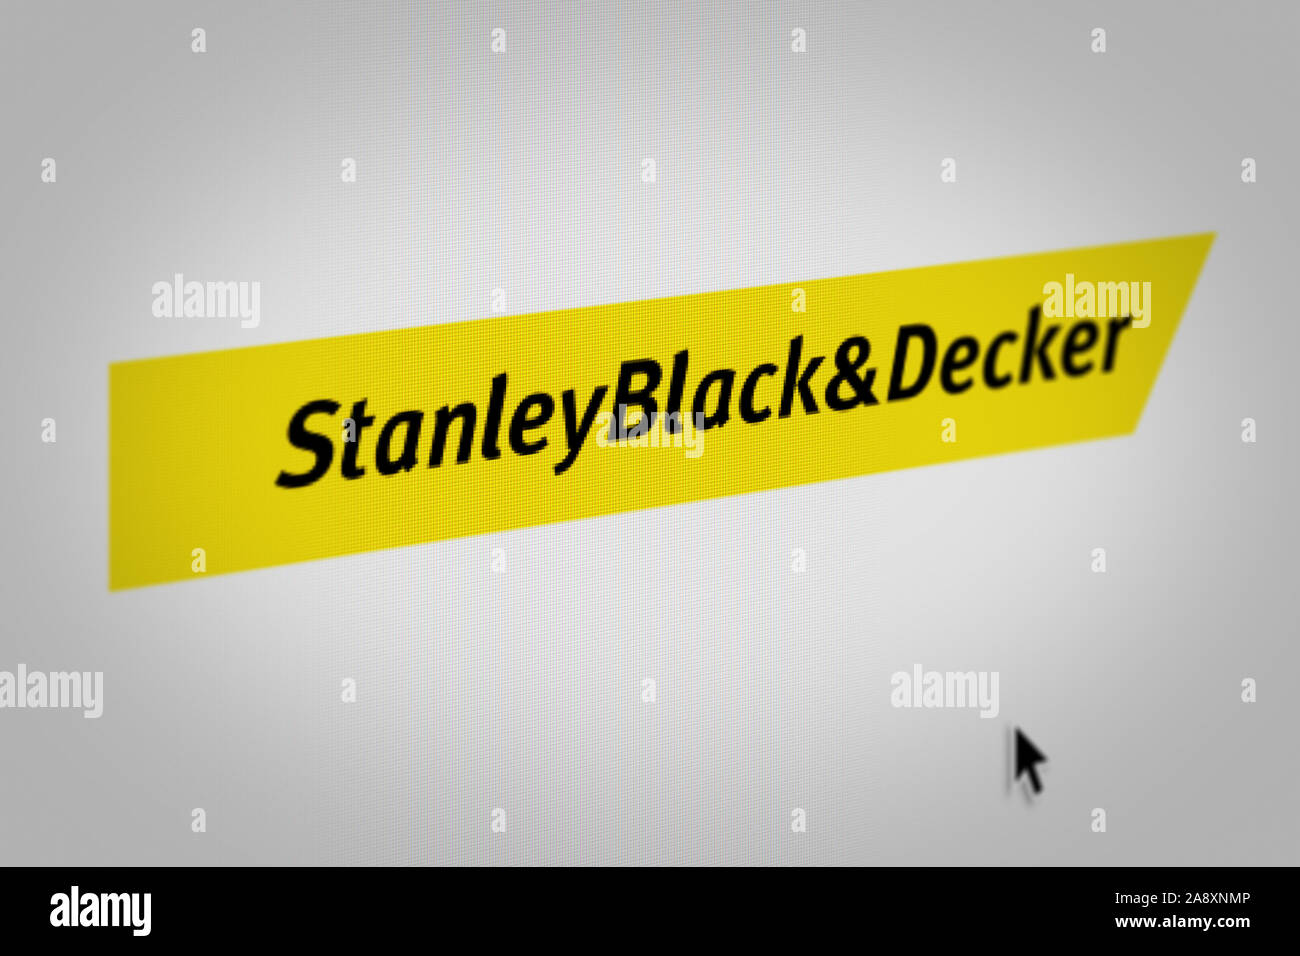 https://c8.alamy.com/comp/2A8XNMP/logo-of-the-public-company-stanley-black-decker-displayed-on-a-computer-screen-in-close-up-credit-pixduce-2A8XNMP.jpg